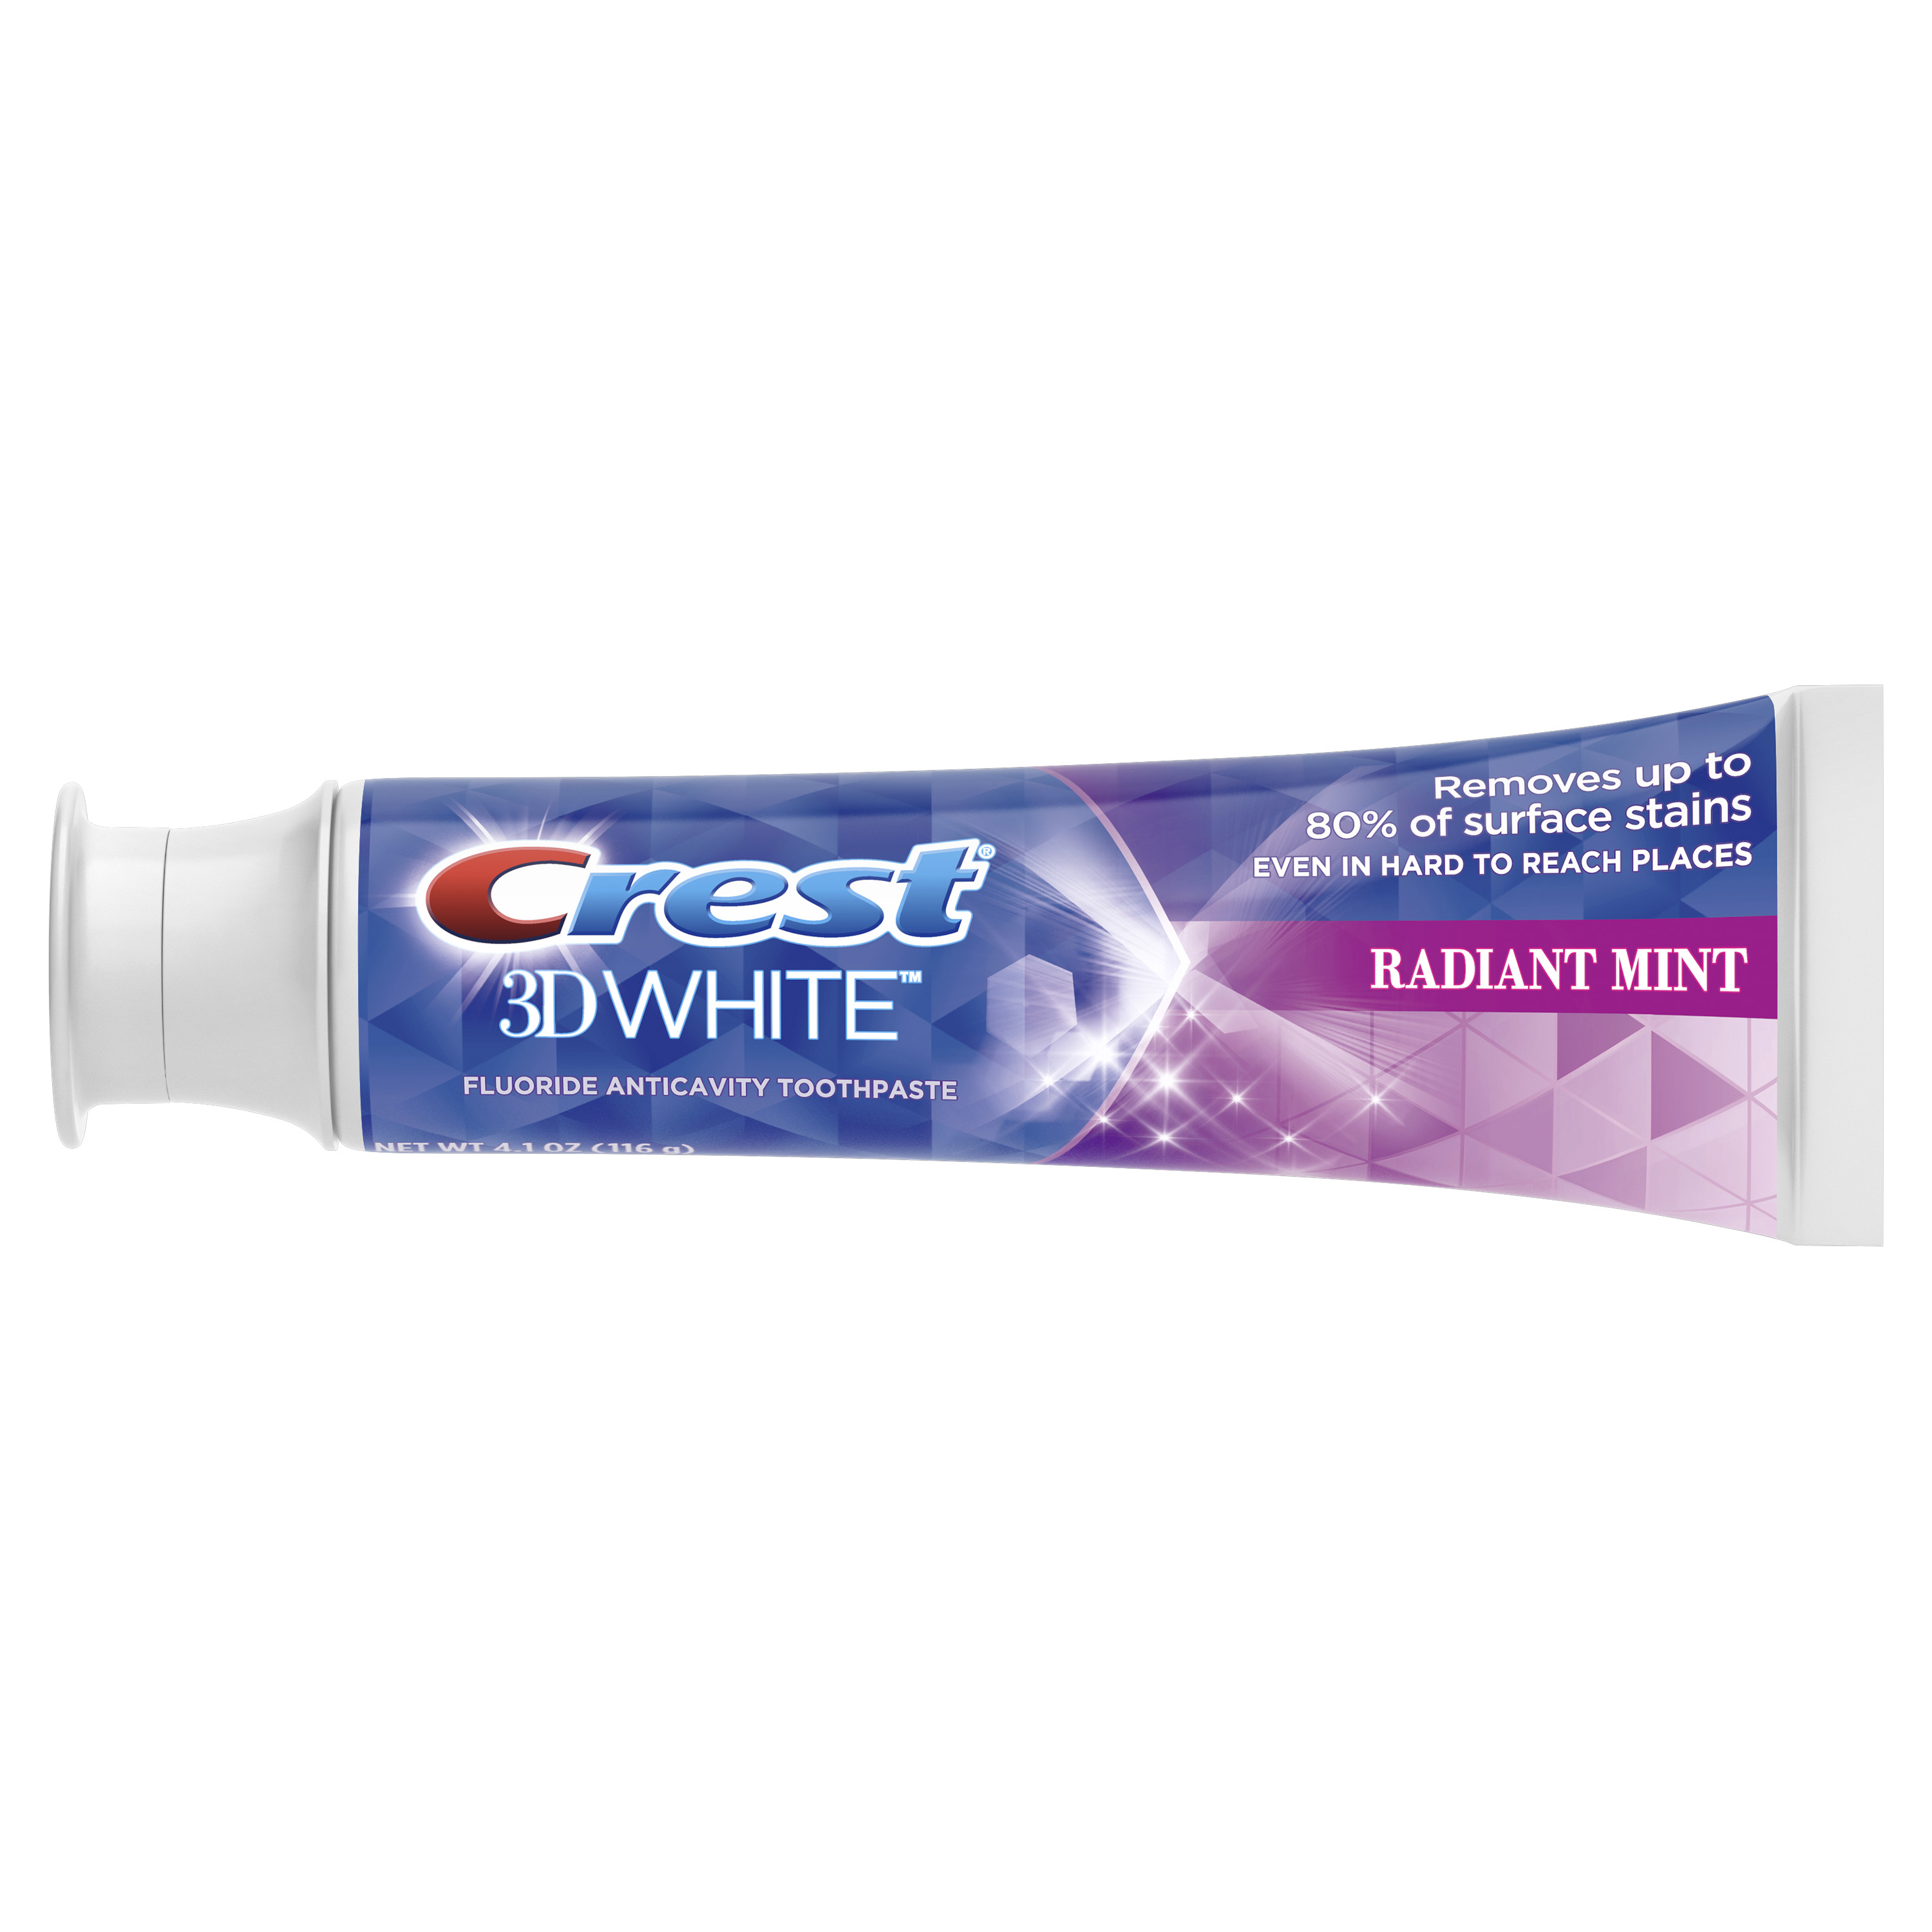 Crest 3D White Whitening Toothpaste, Radiant Mint, 4.1 oz, 3 Pack - image 3 of 8